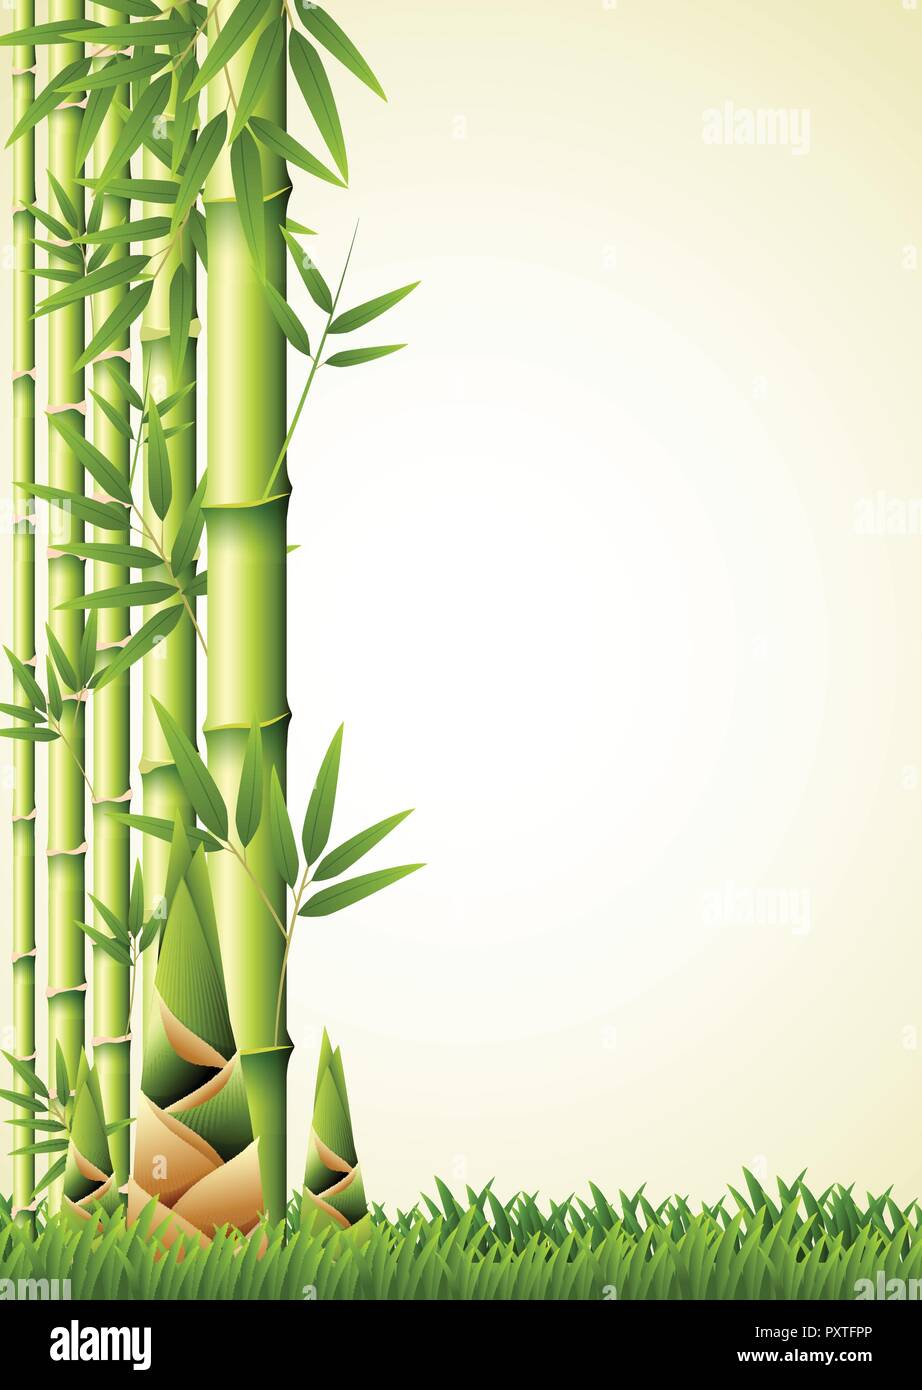 Nature background design with bamboo illustration Stock Vector ...